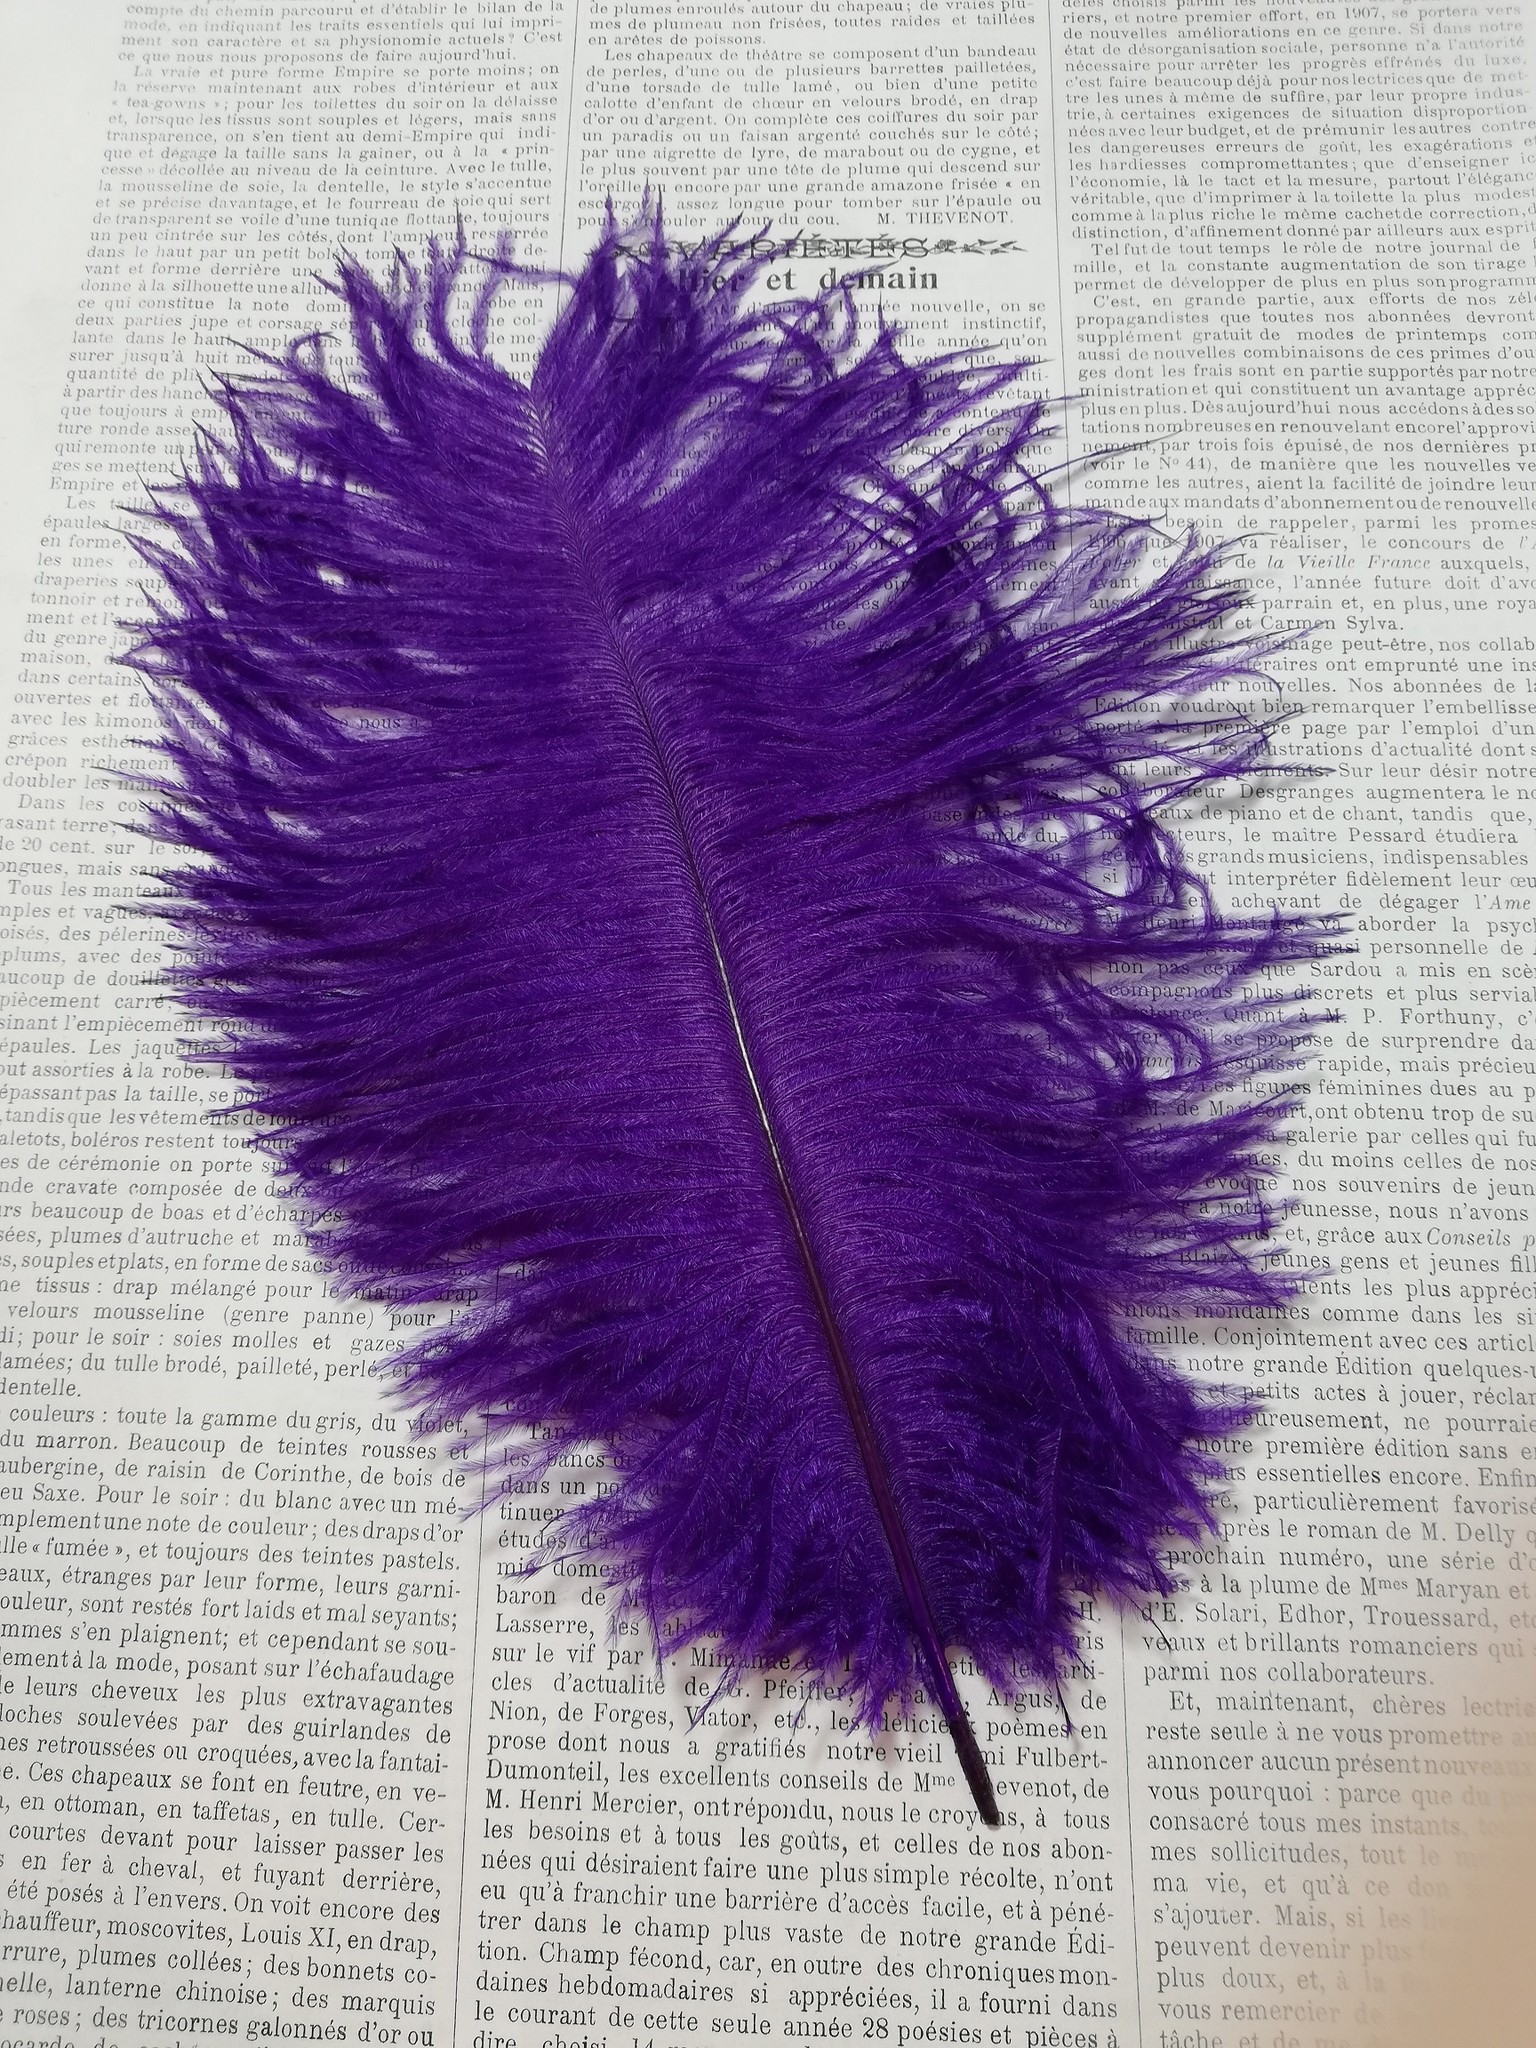 Ostrich feathers diff. colors